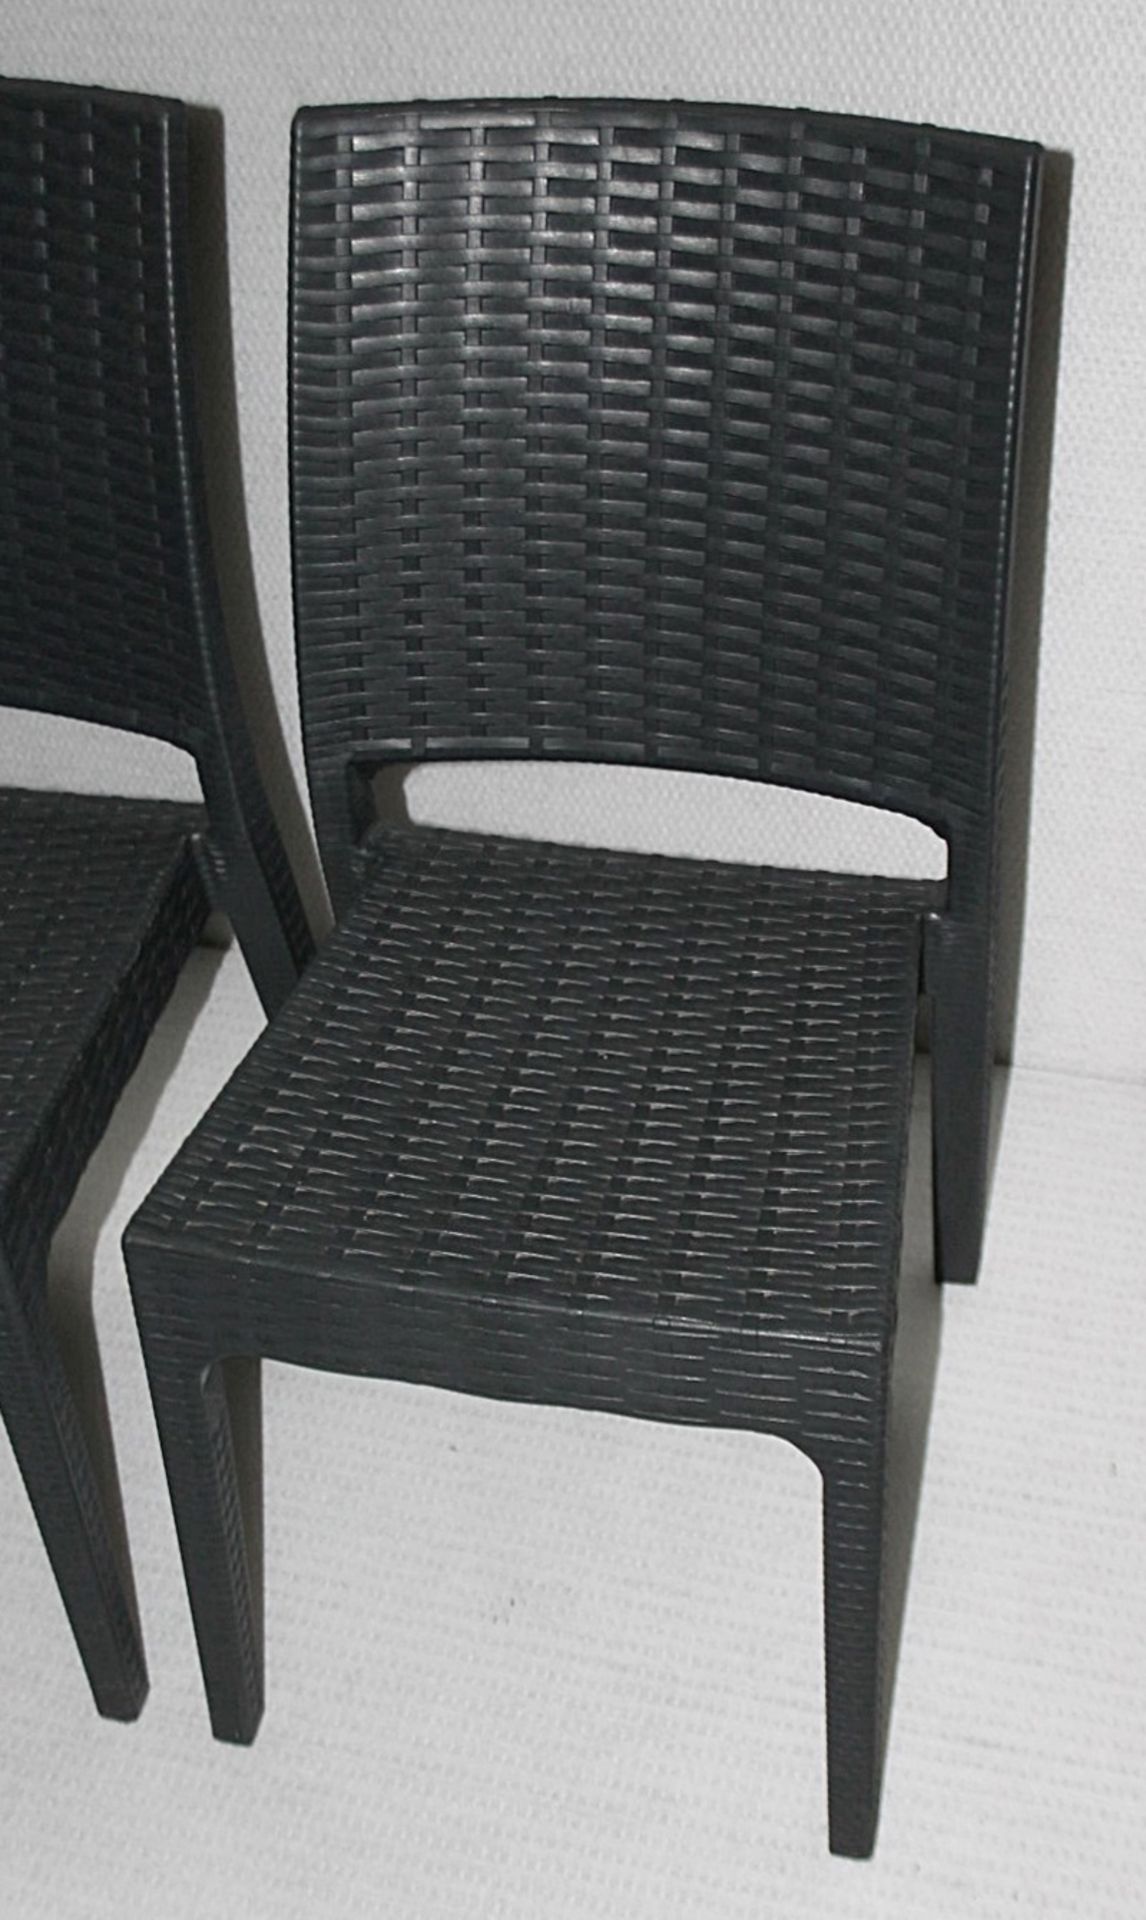 8 x Siesta 'Florida' Rattan Style Garden Chairs In Dark Grey - Suitable For Commercial or Home Use - - Image 14 of 21